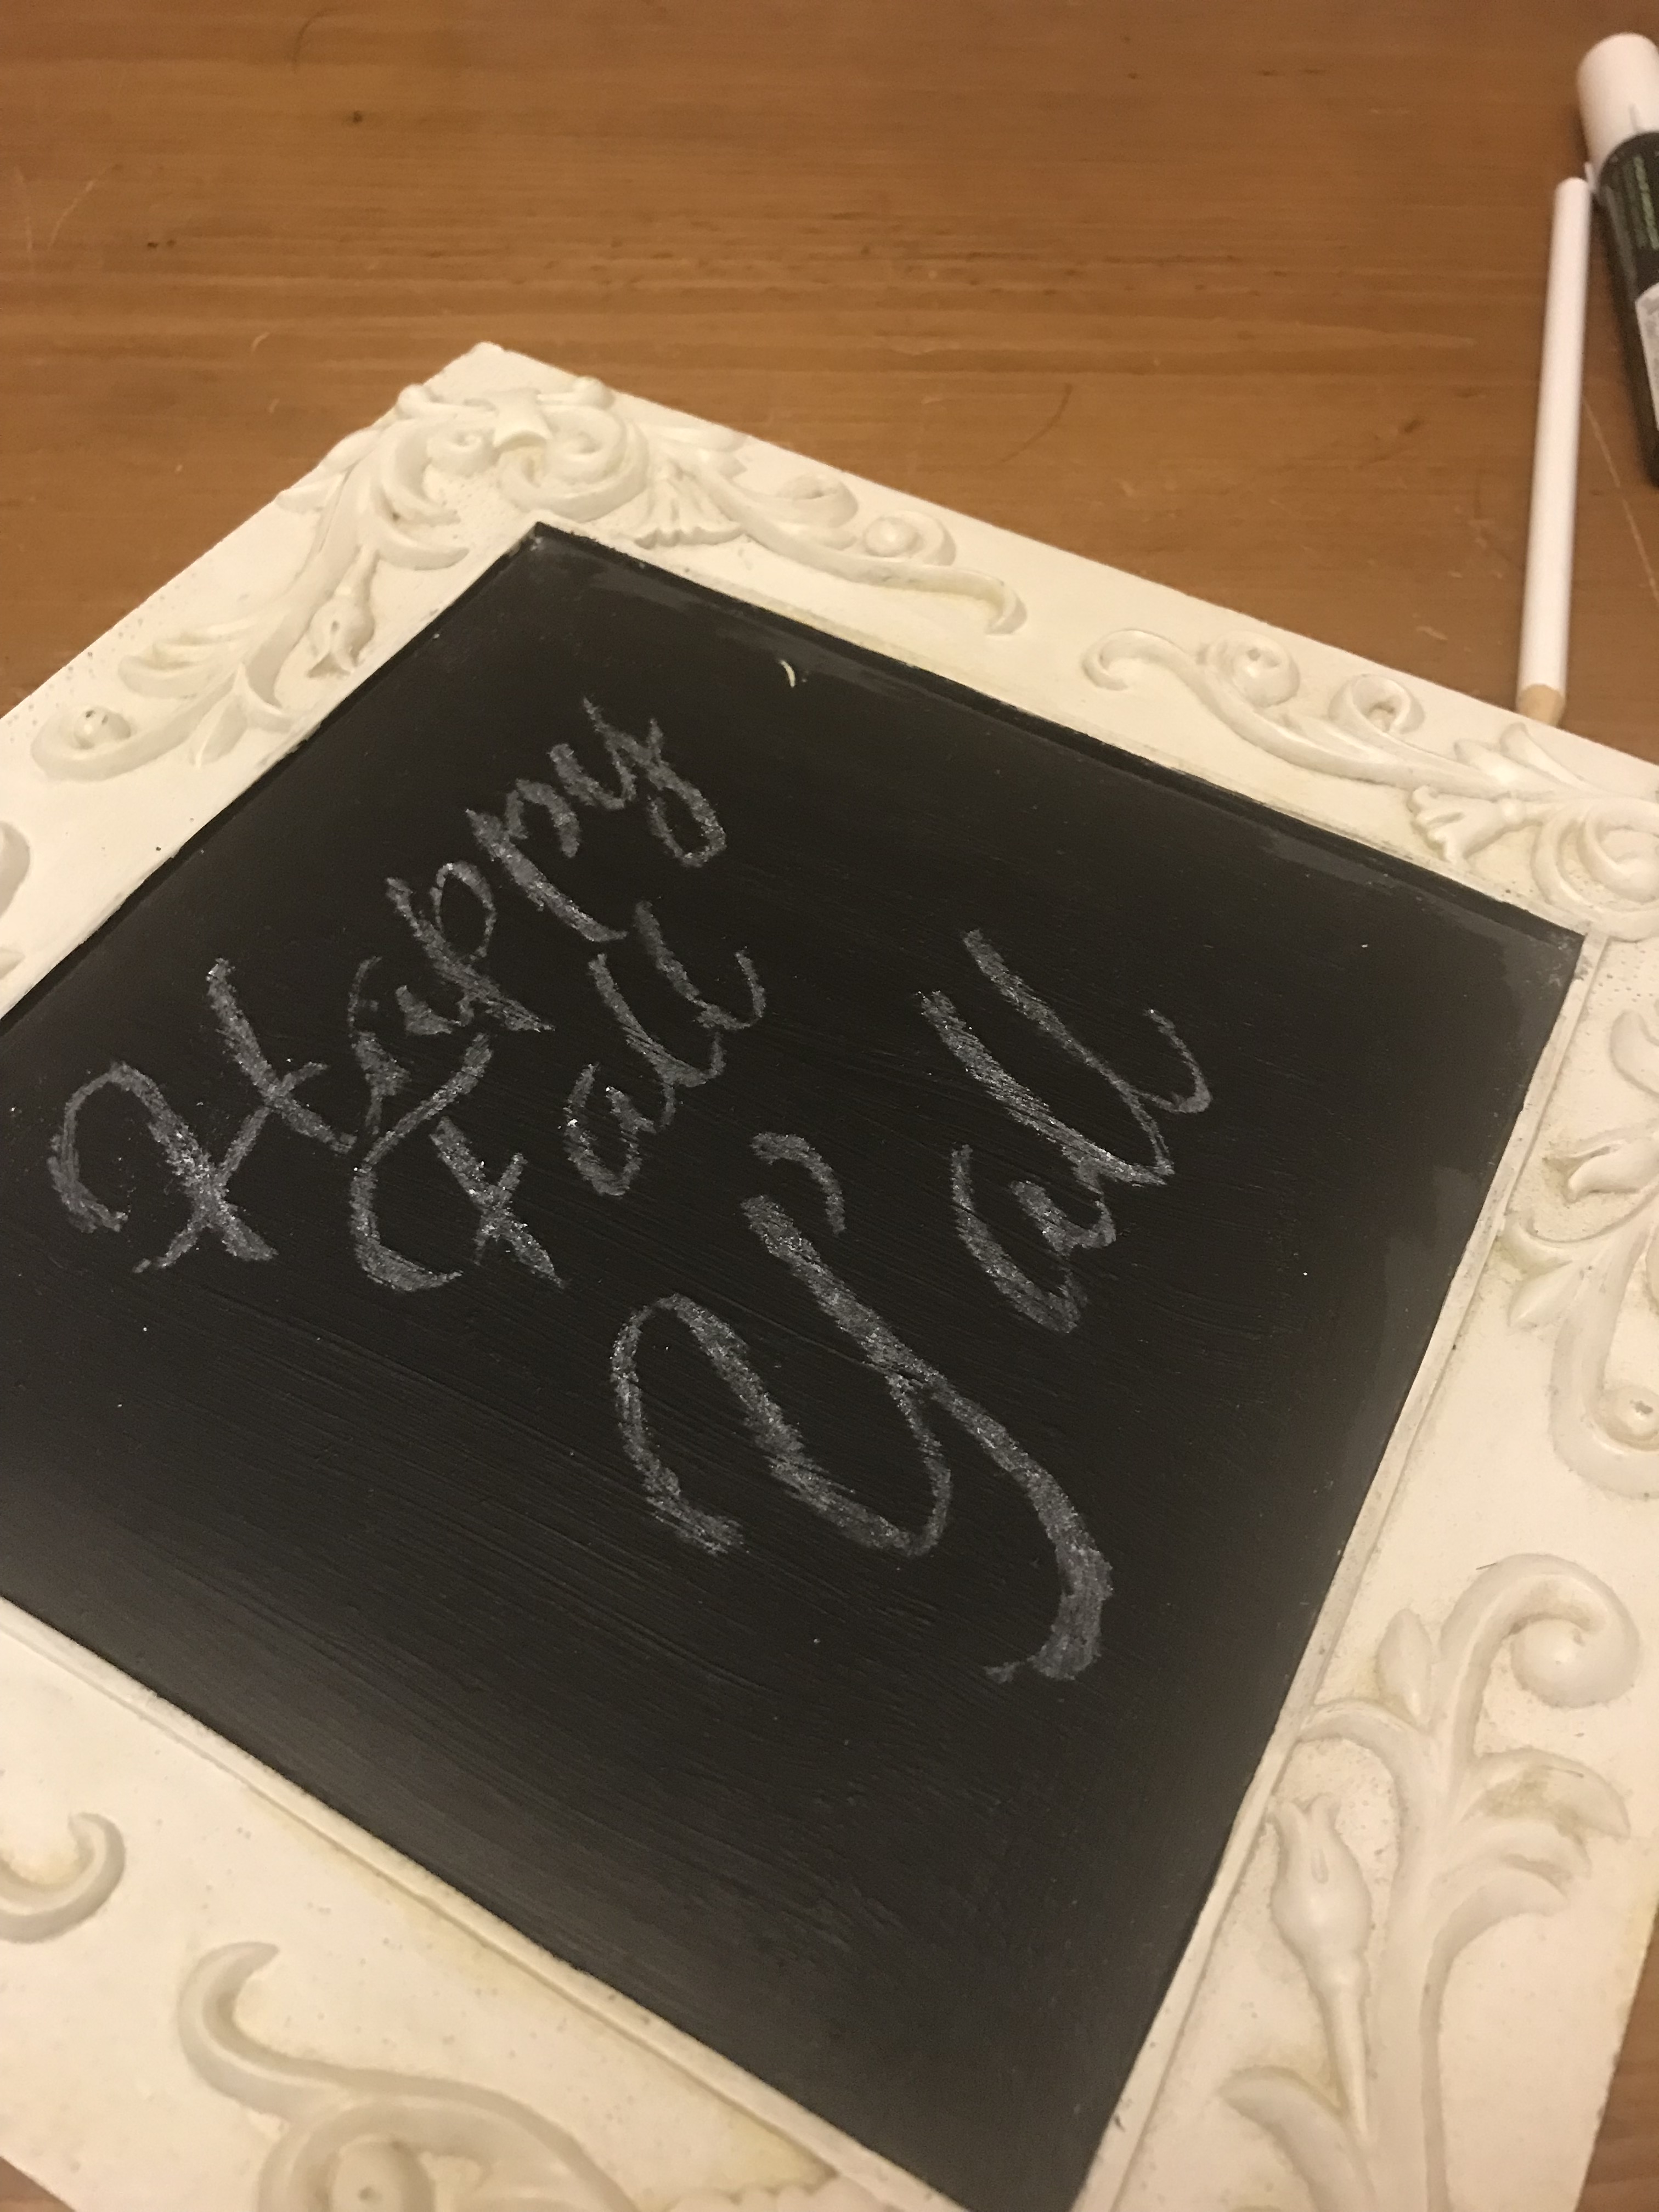 An extremely easy chalkboard lettering hack perfect for DIY, crafts, holiday projects, and weddings